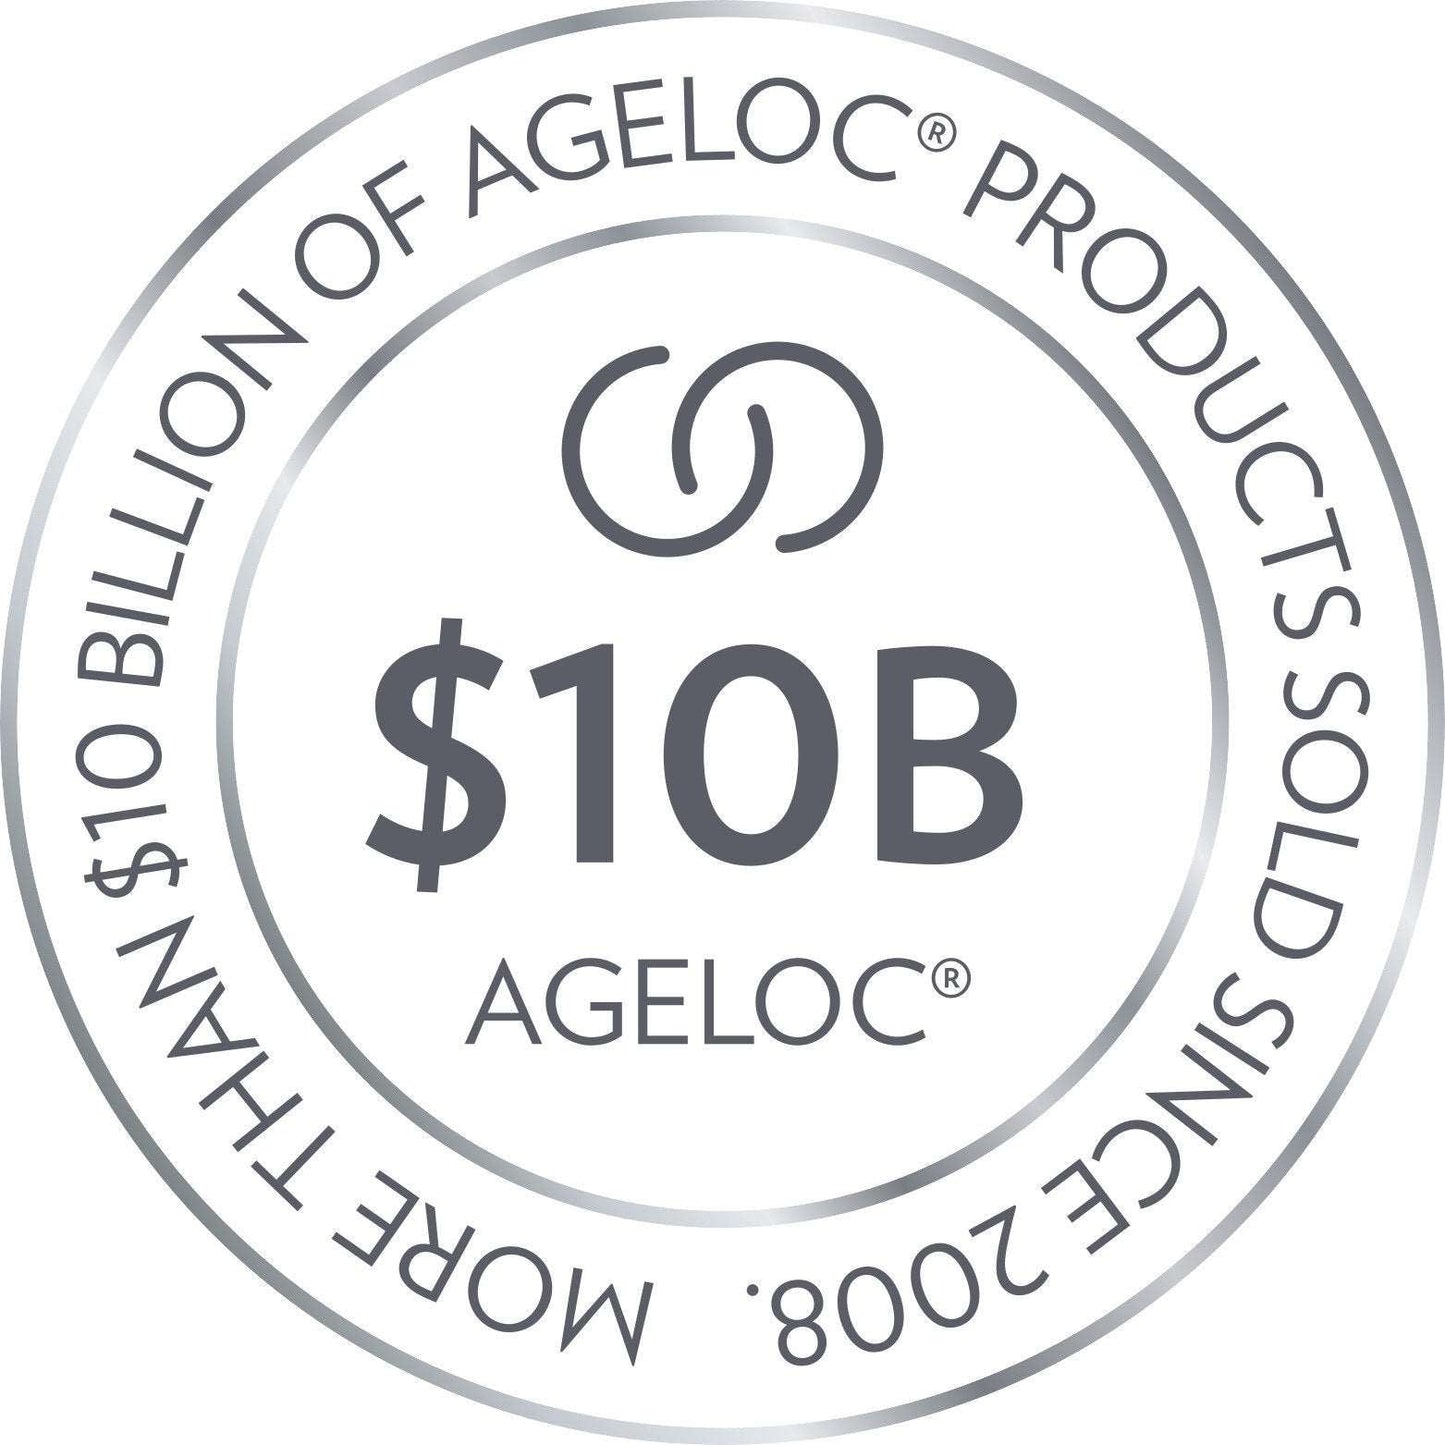 Nu Skin ageLOC series more than 10 trillion USD turnover